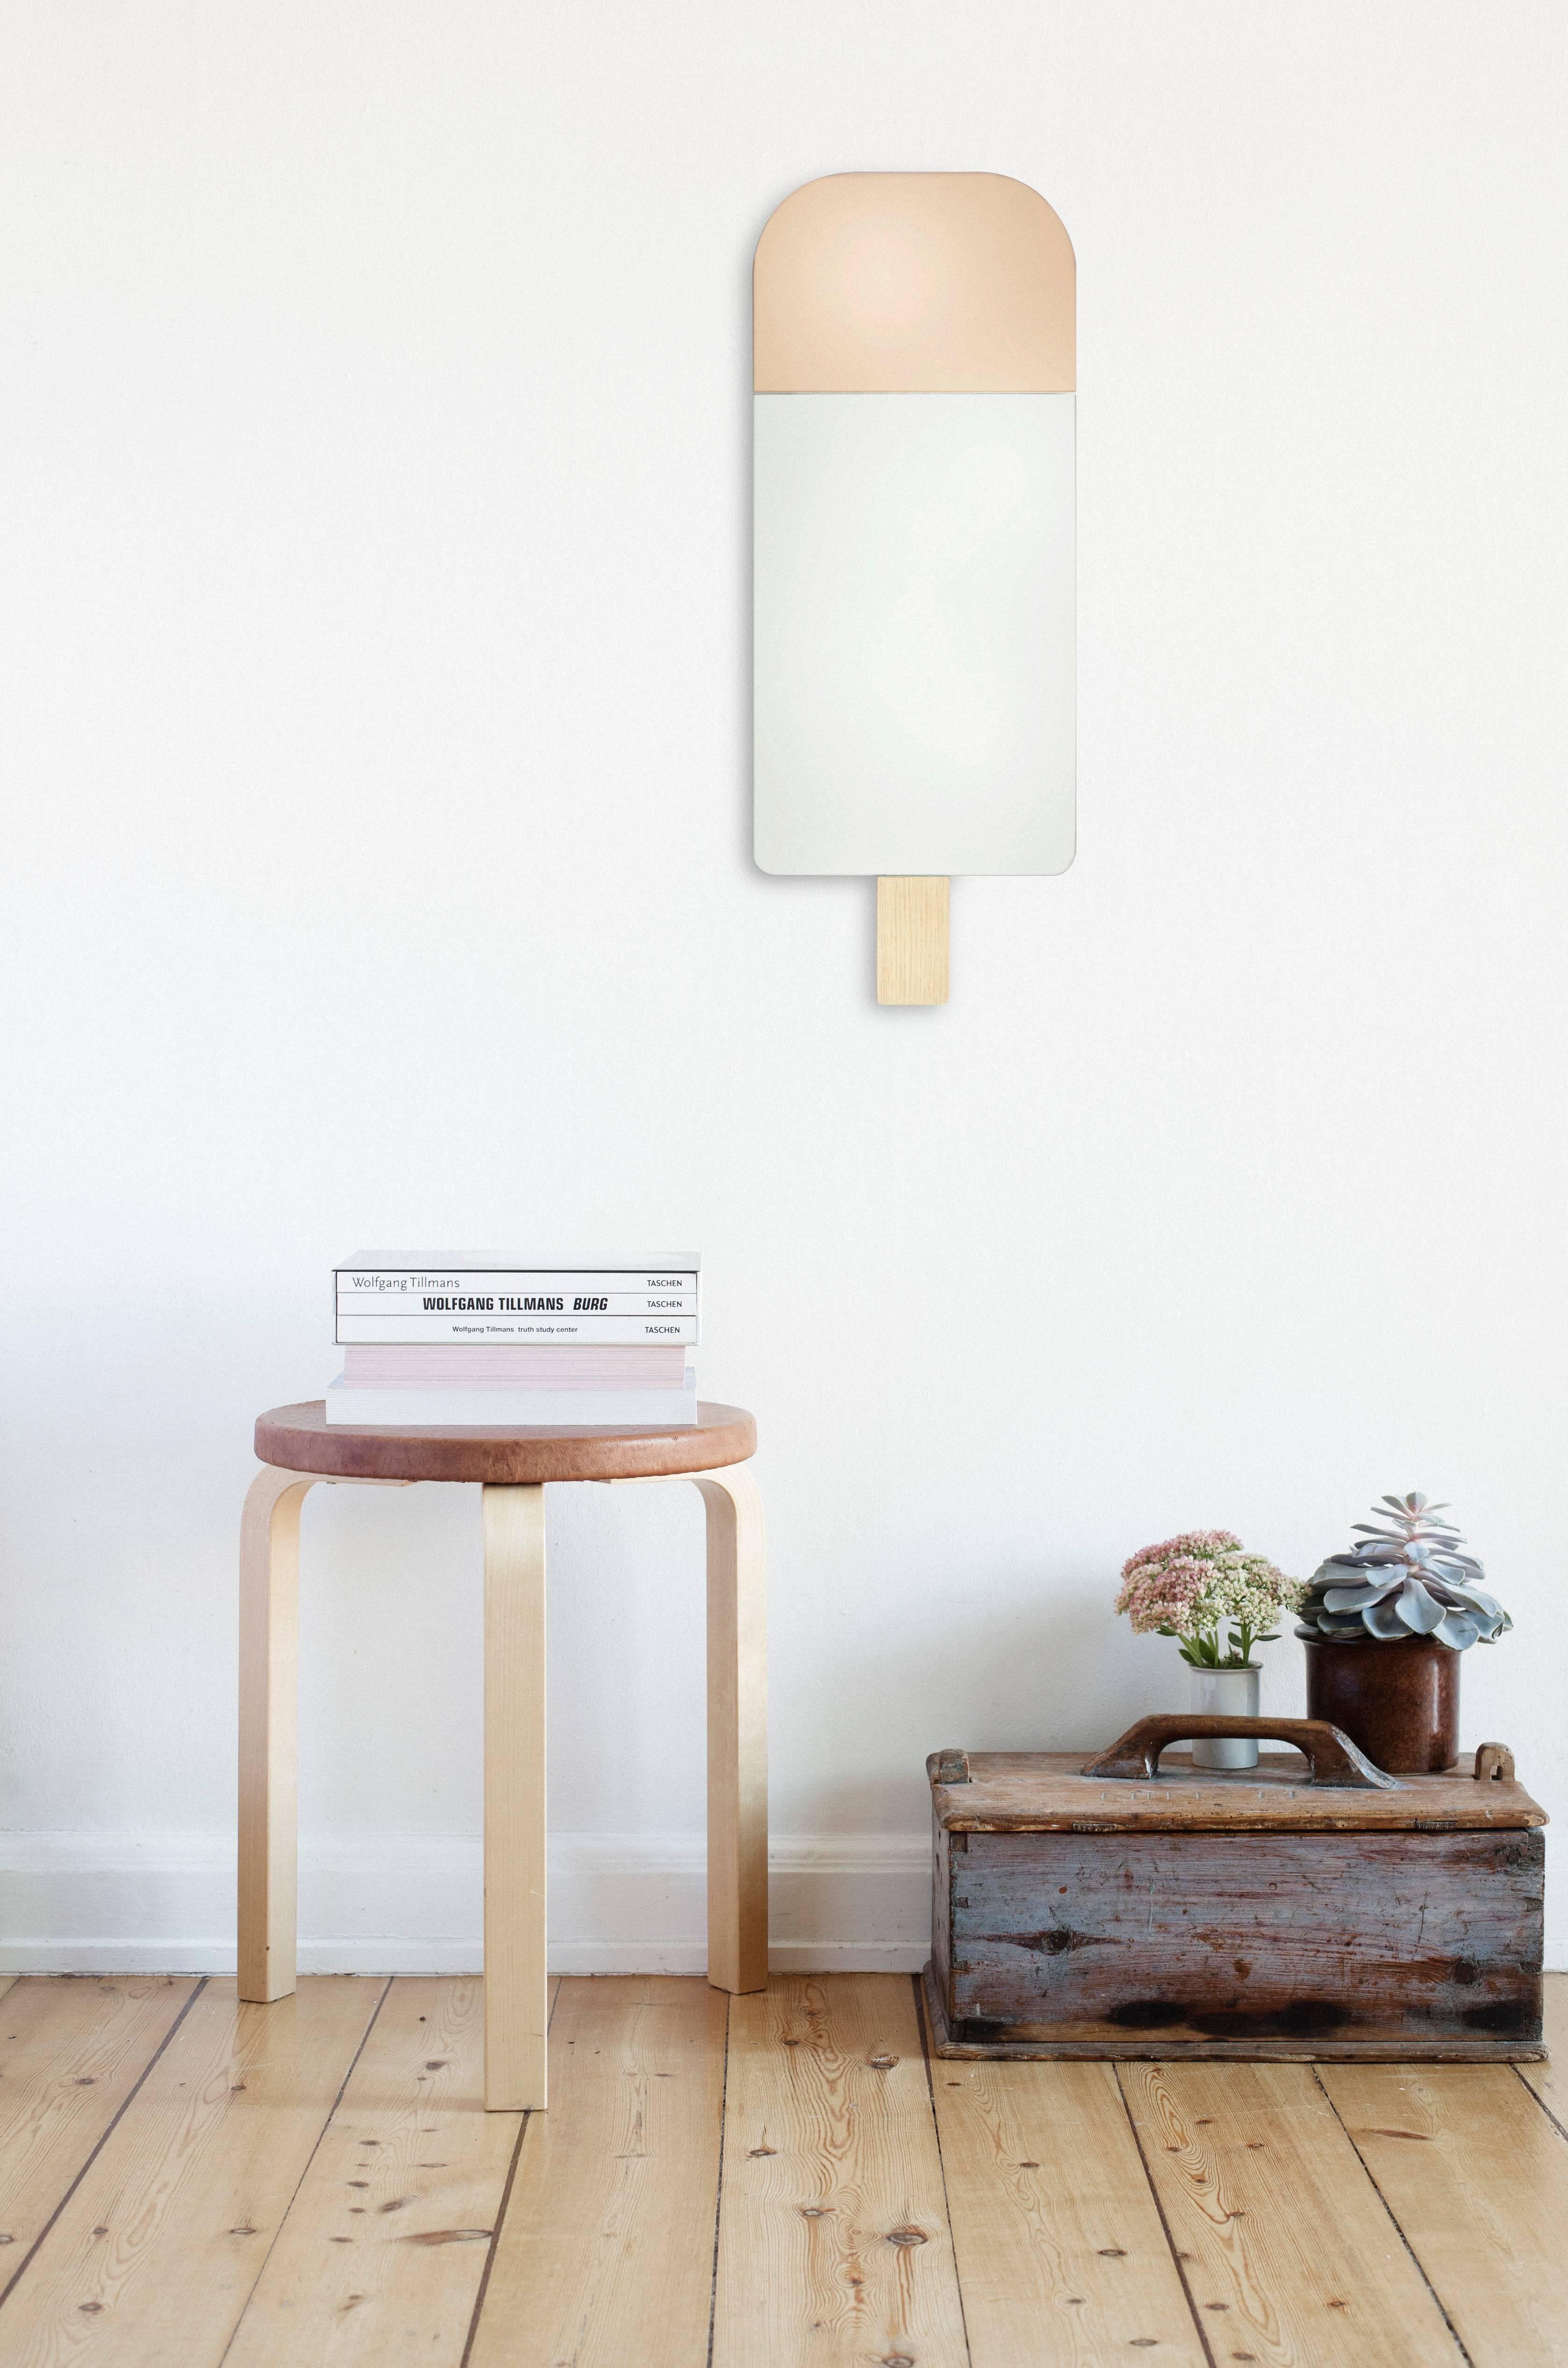 Ice cream mirror in warm rose by Tor and Nicole Vitner Servé.

Designed by Tor and Nicole Vitner Servé
Contemporary, Denmark, 2015
Warm rose and mirror glass, European oak
Measures: H 22 in, W 8.5 in

Also available in ocean blue, hazel brown,